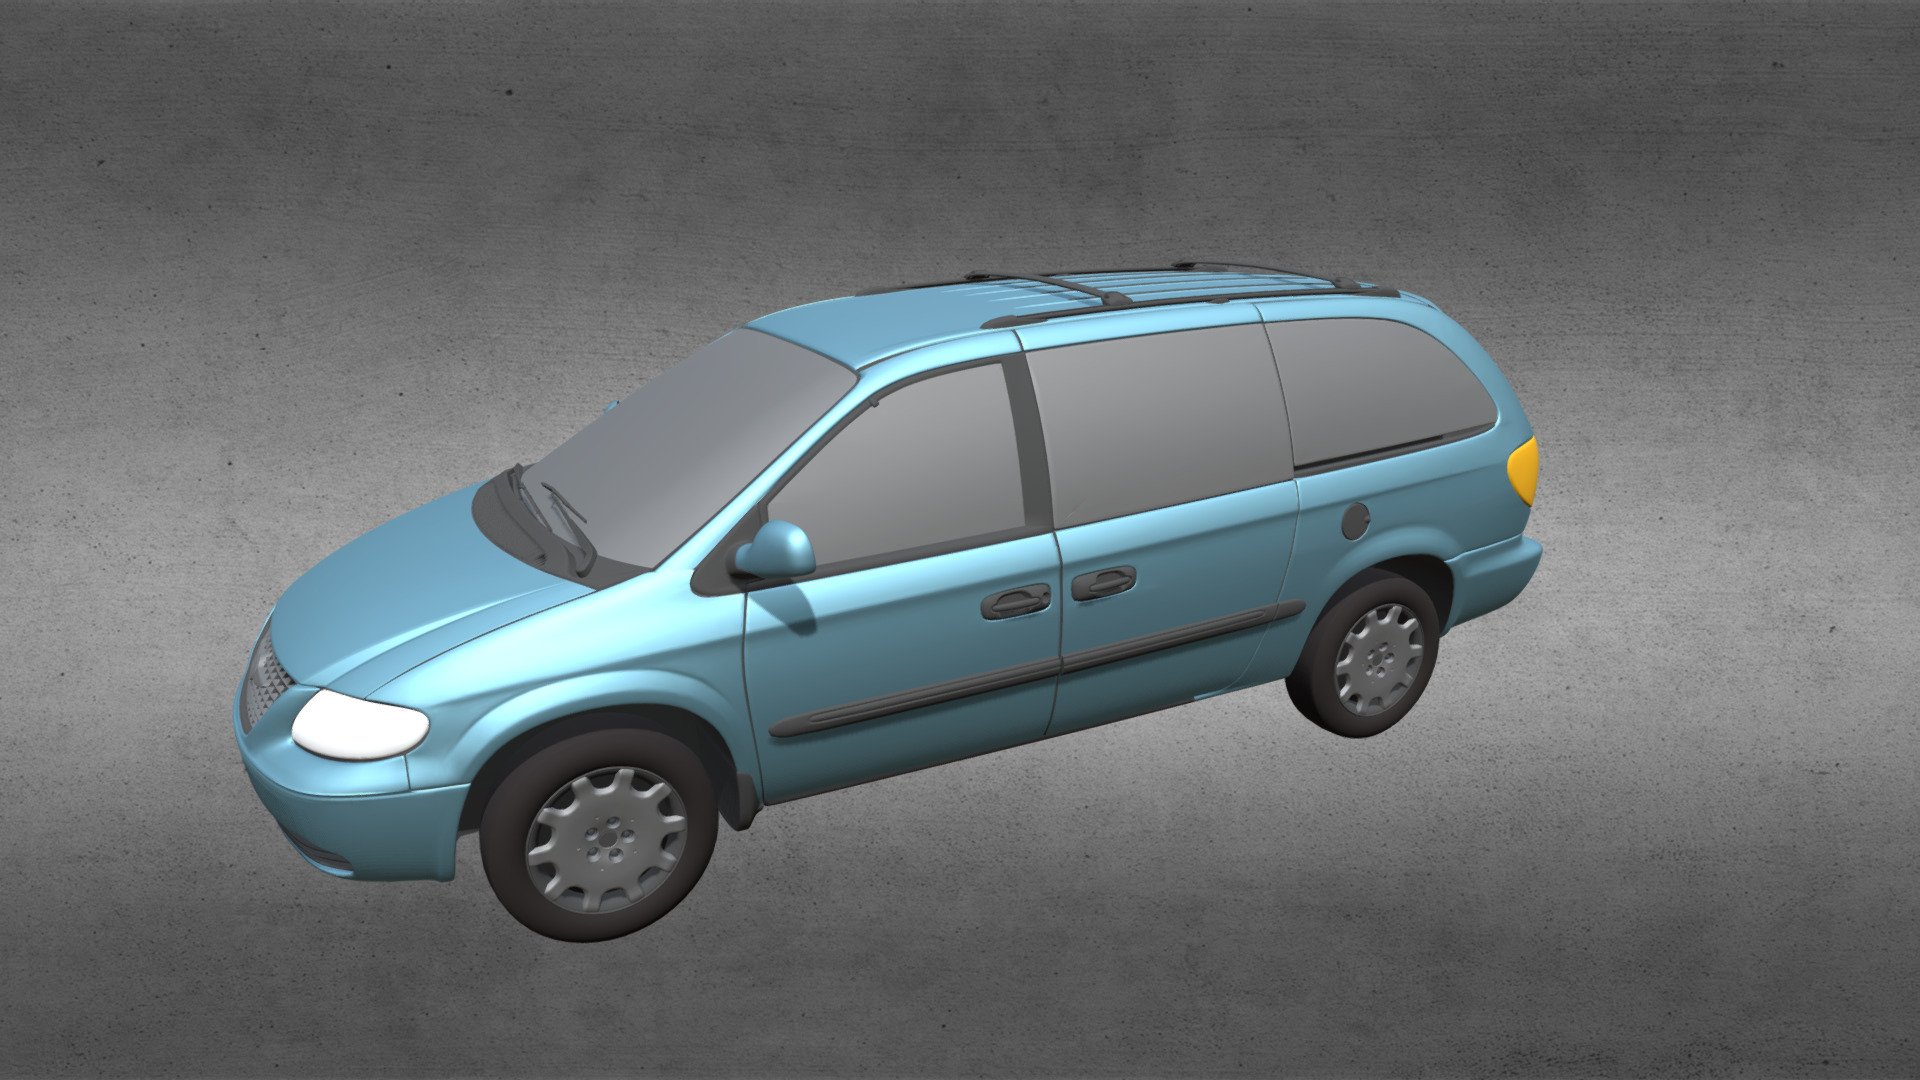 3D model Chrysler Town Country LX Minivan - This is a 3D model of the Chrysler Town Country LX Minivan. The 3D model is about a blue car parked on pavement.